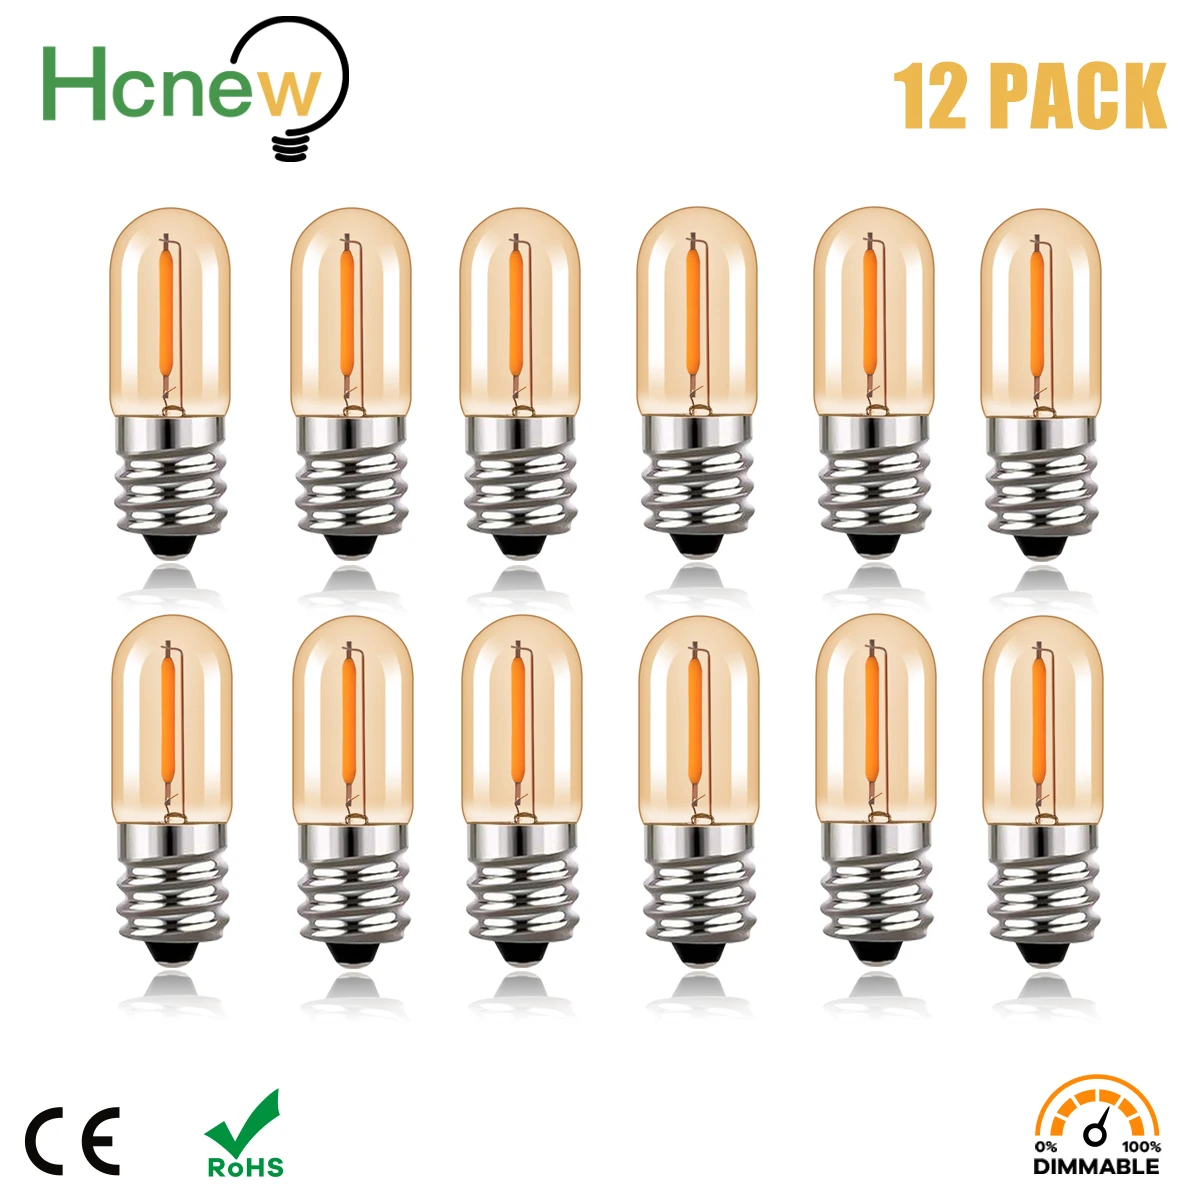 Hcnew Dimmable E12 Led Filament Night Lamp T16 0.6W E14 candelabra base Warm white 2200K Amber Glow 220V LED candle lamps